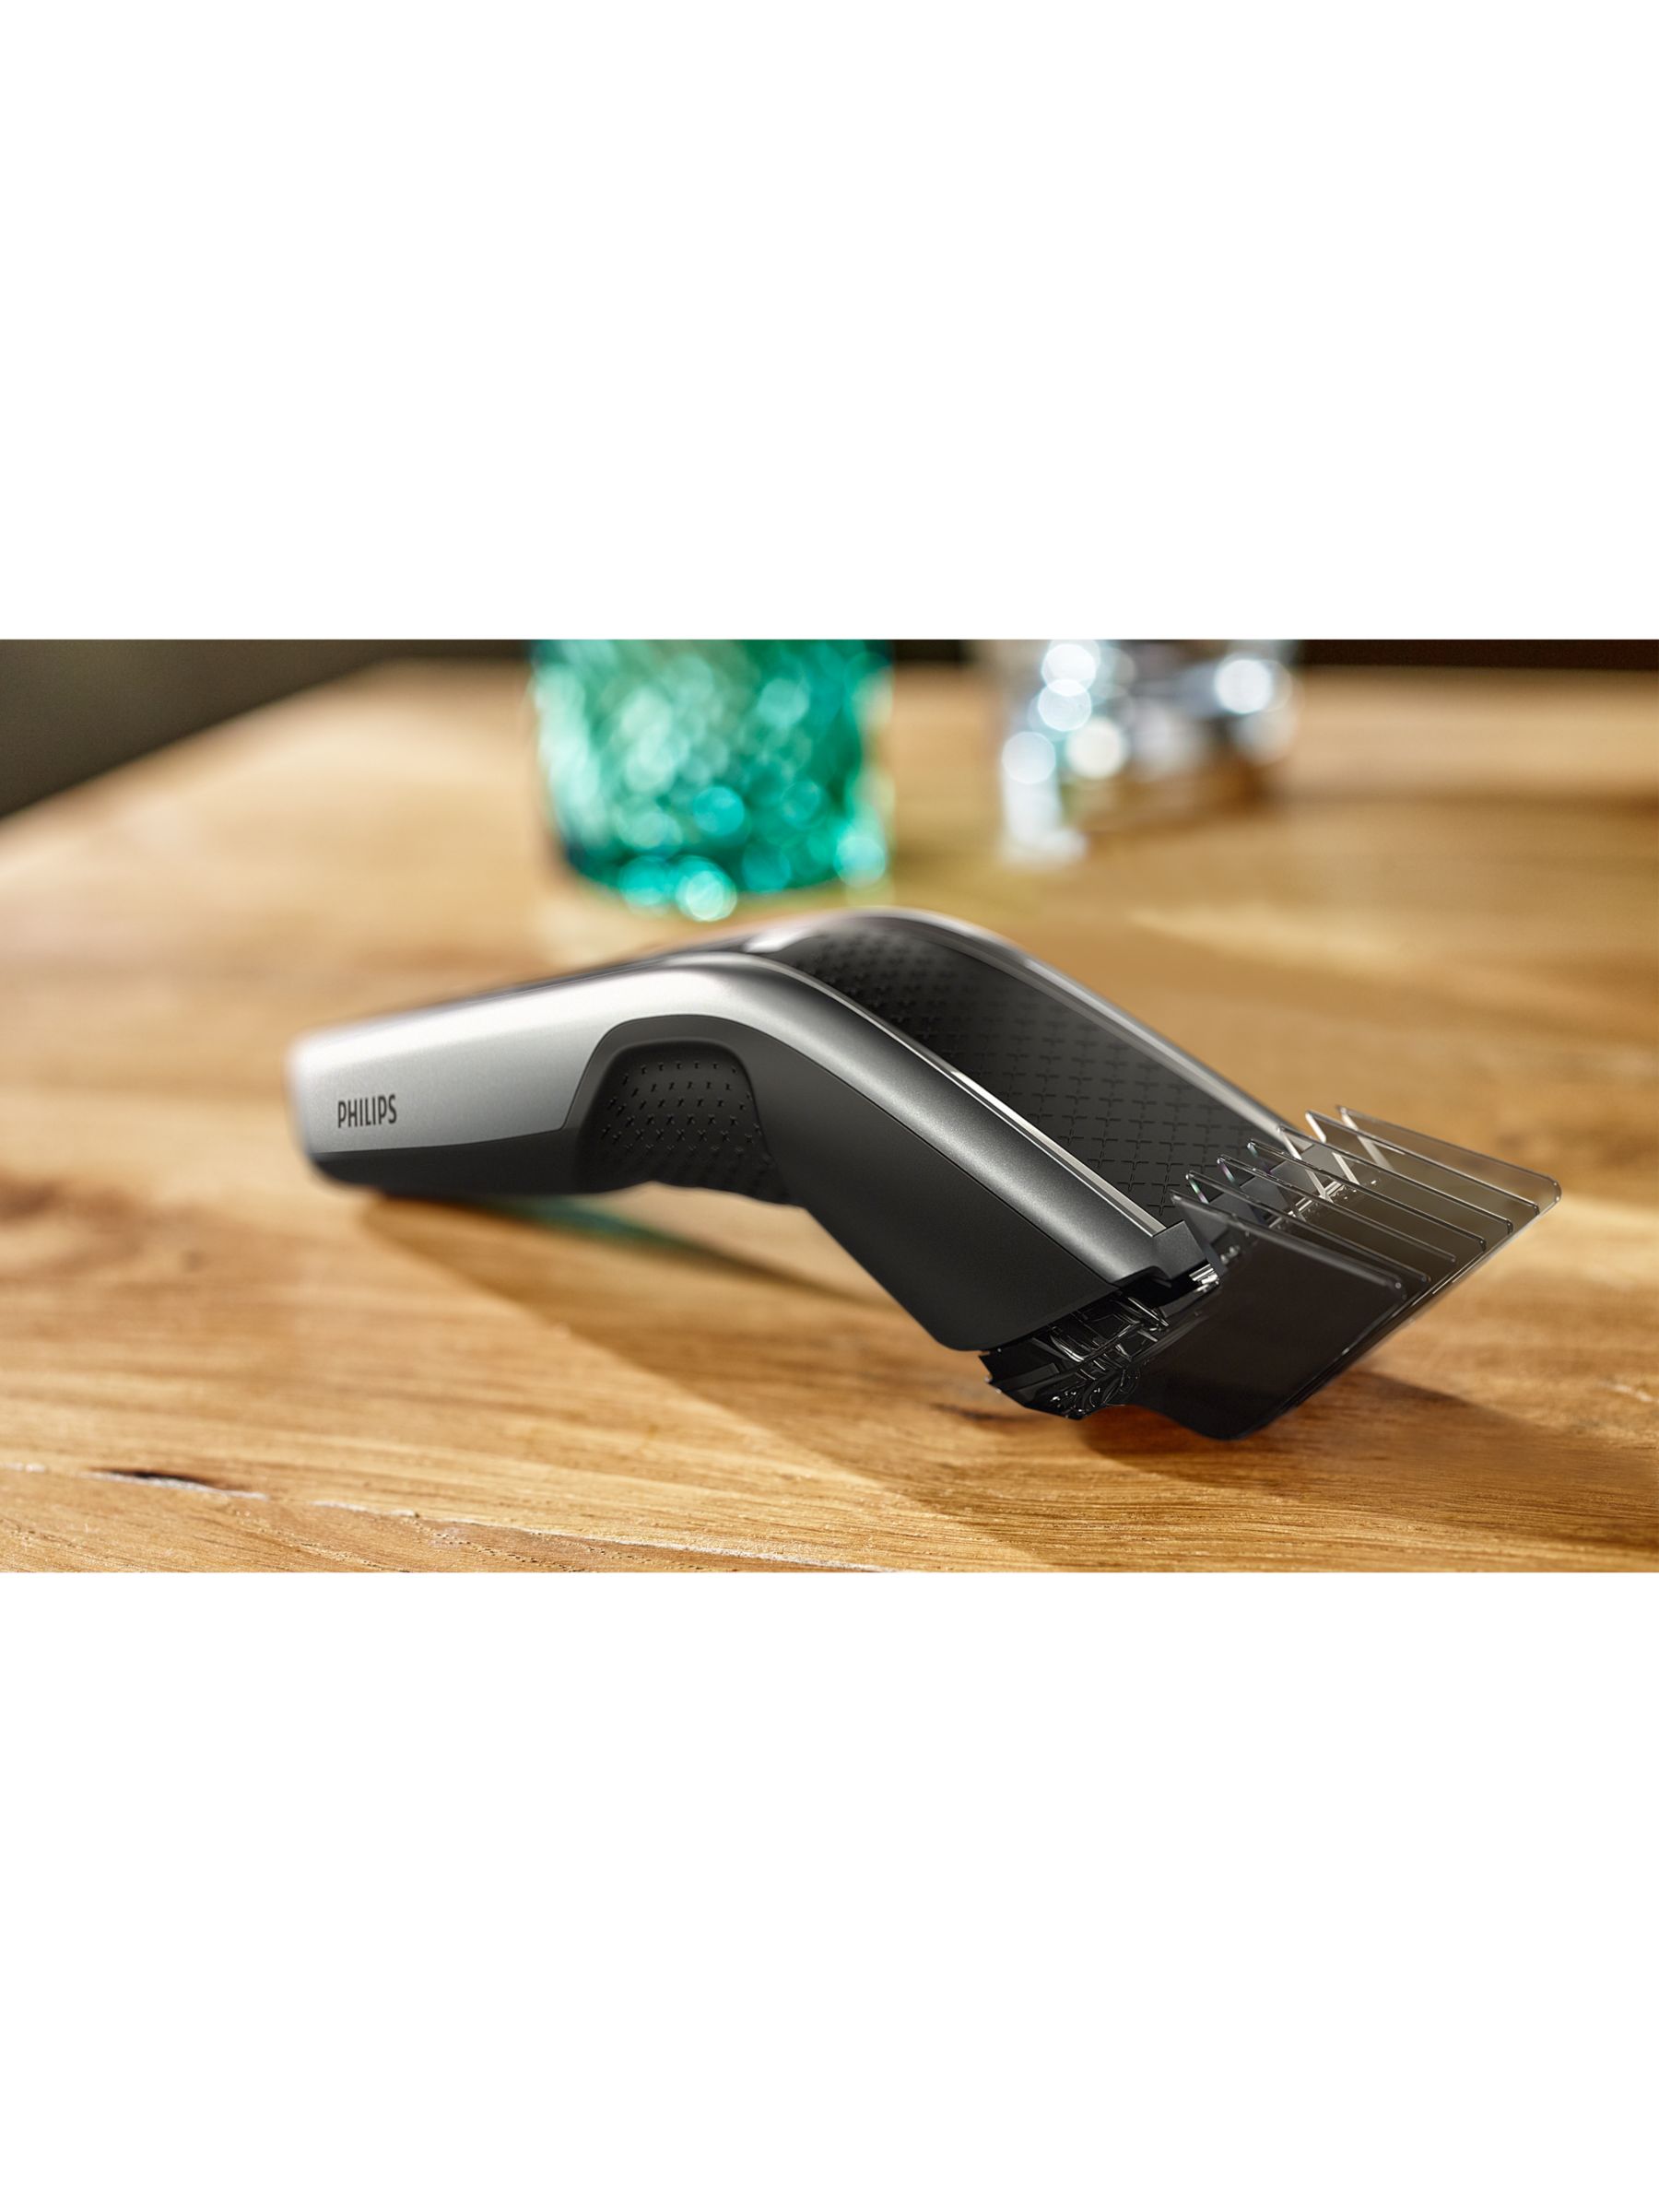 Philips HC5630/13 Series 5000 Cordless Hair Clipper with Turbo Mode, Silver